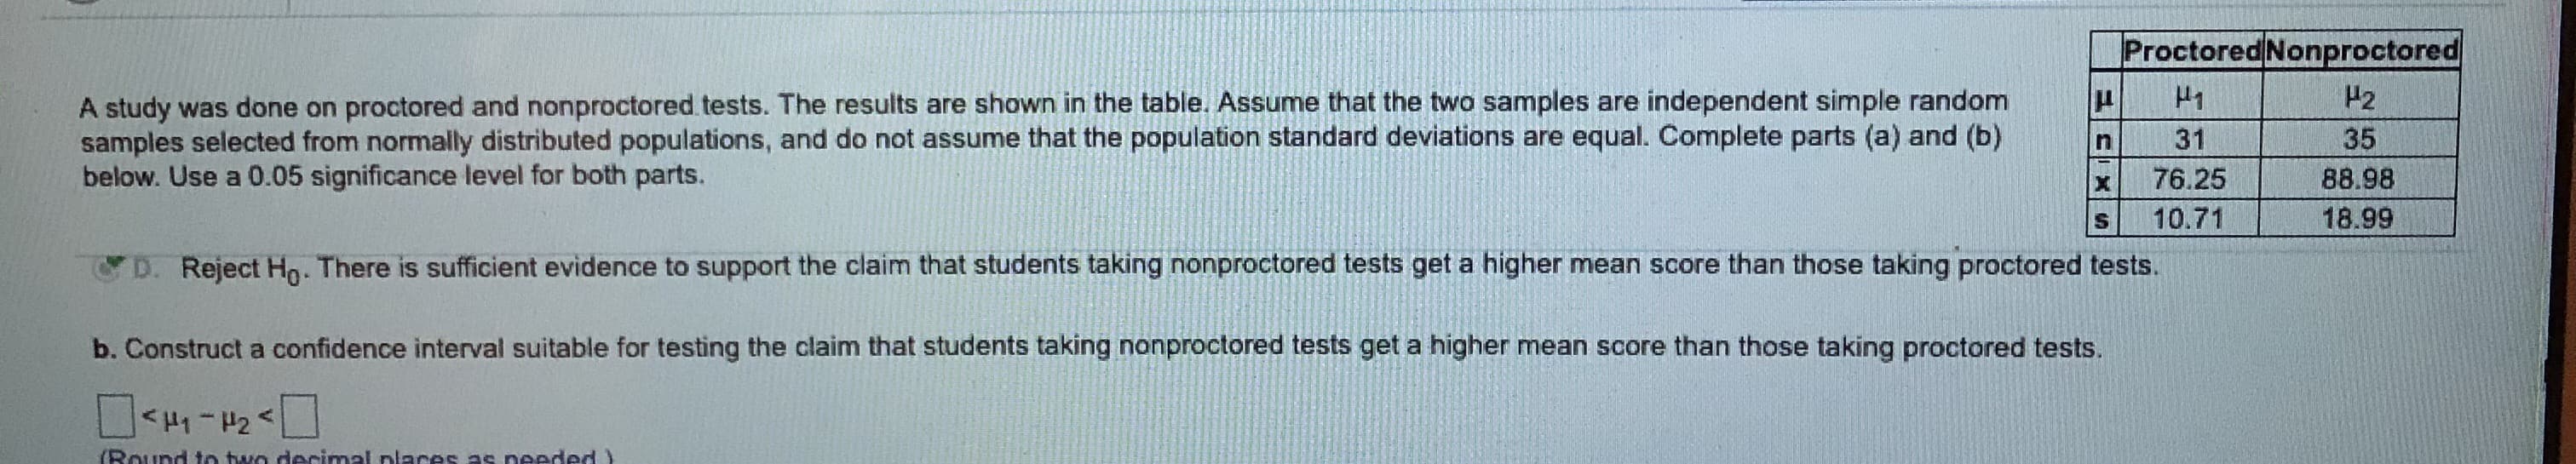 b. Construct a confidence interval suitable for testing the claim that students taking nanproctored tests get a higher mean score than those taking proctored tests.
<H-P2"
